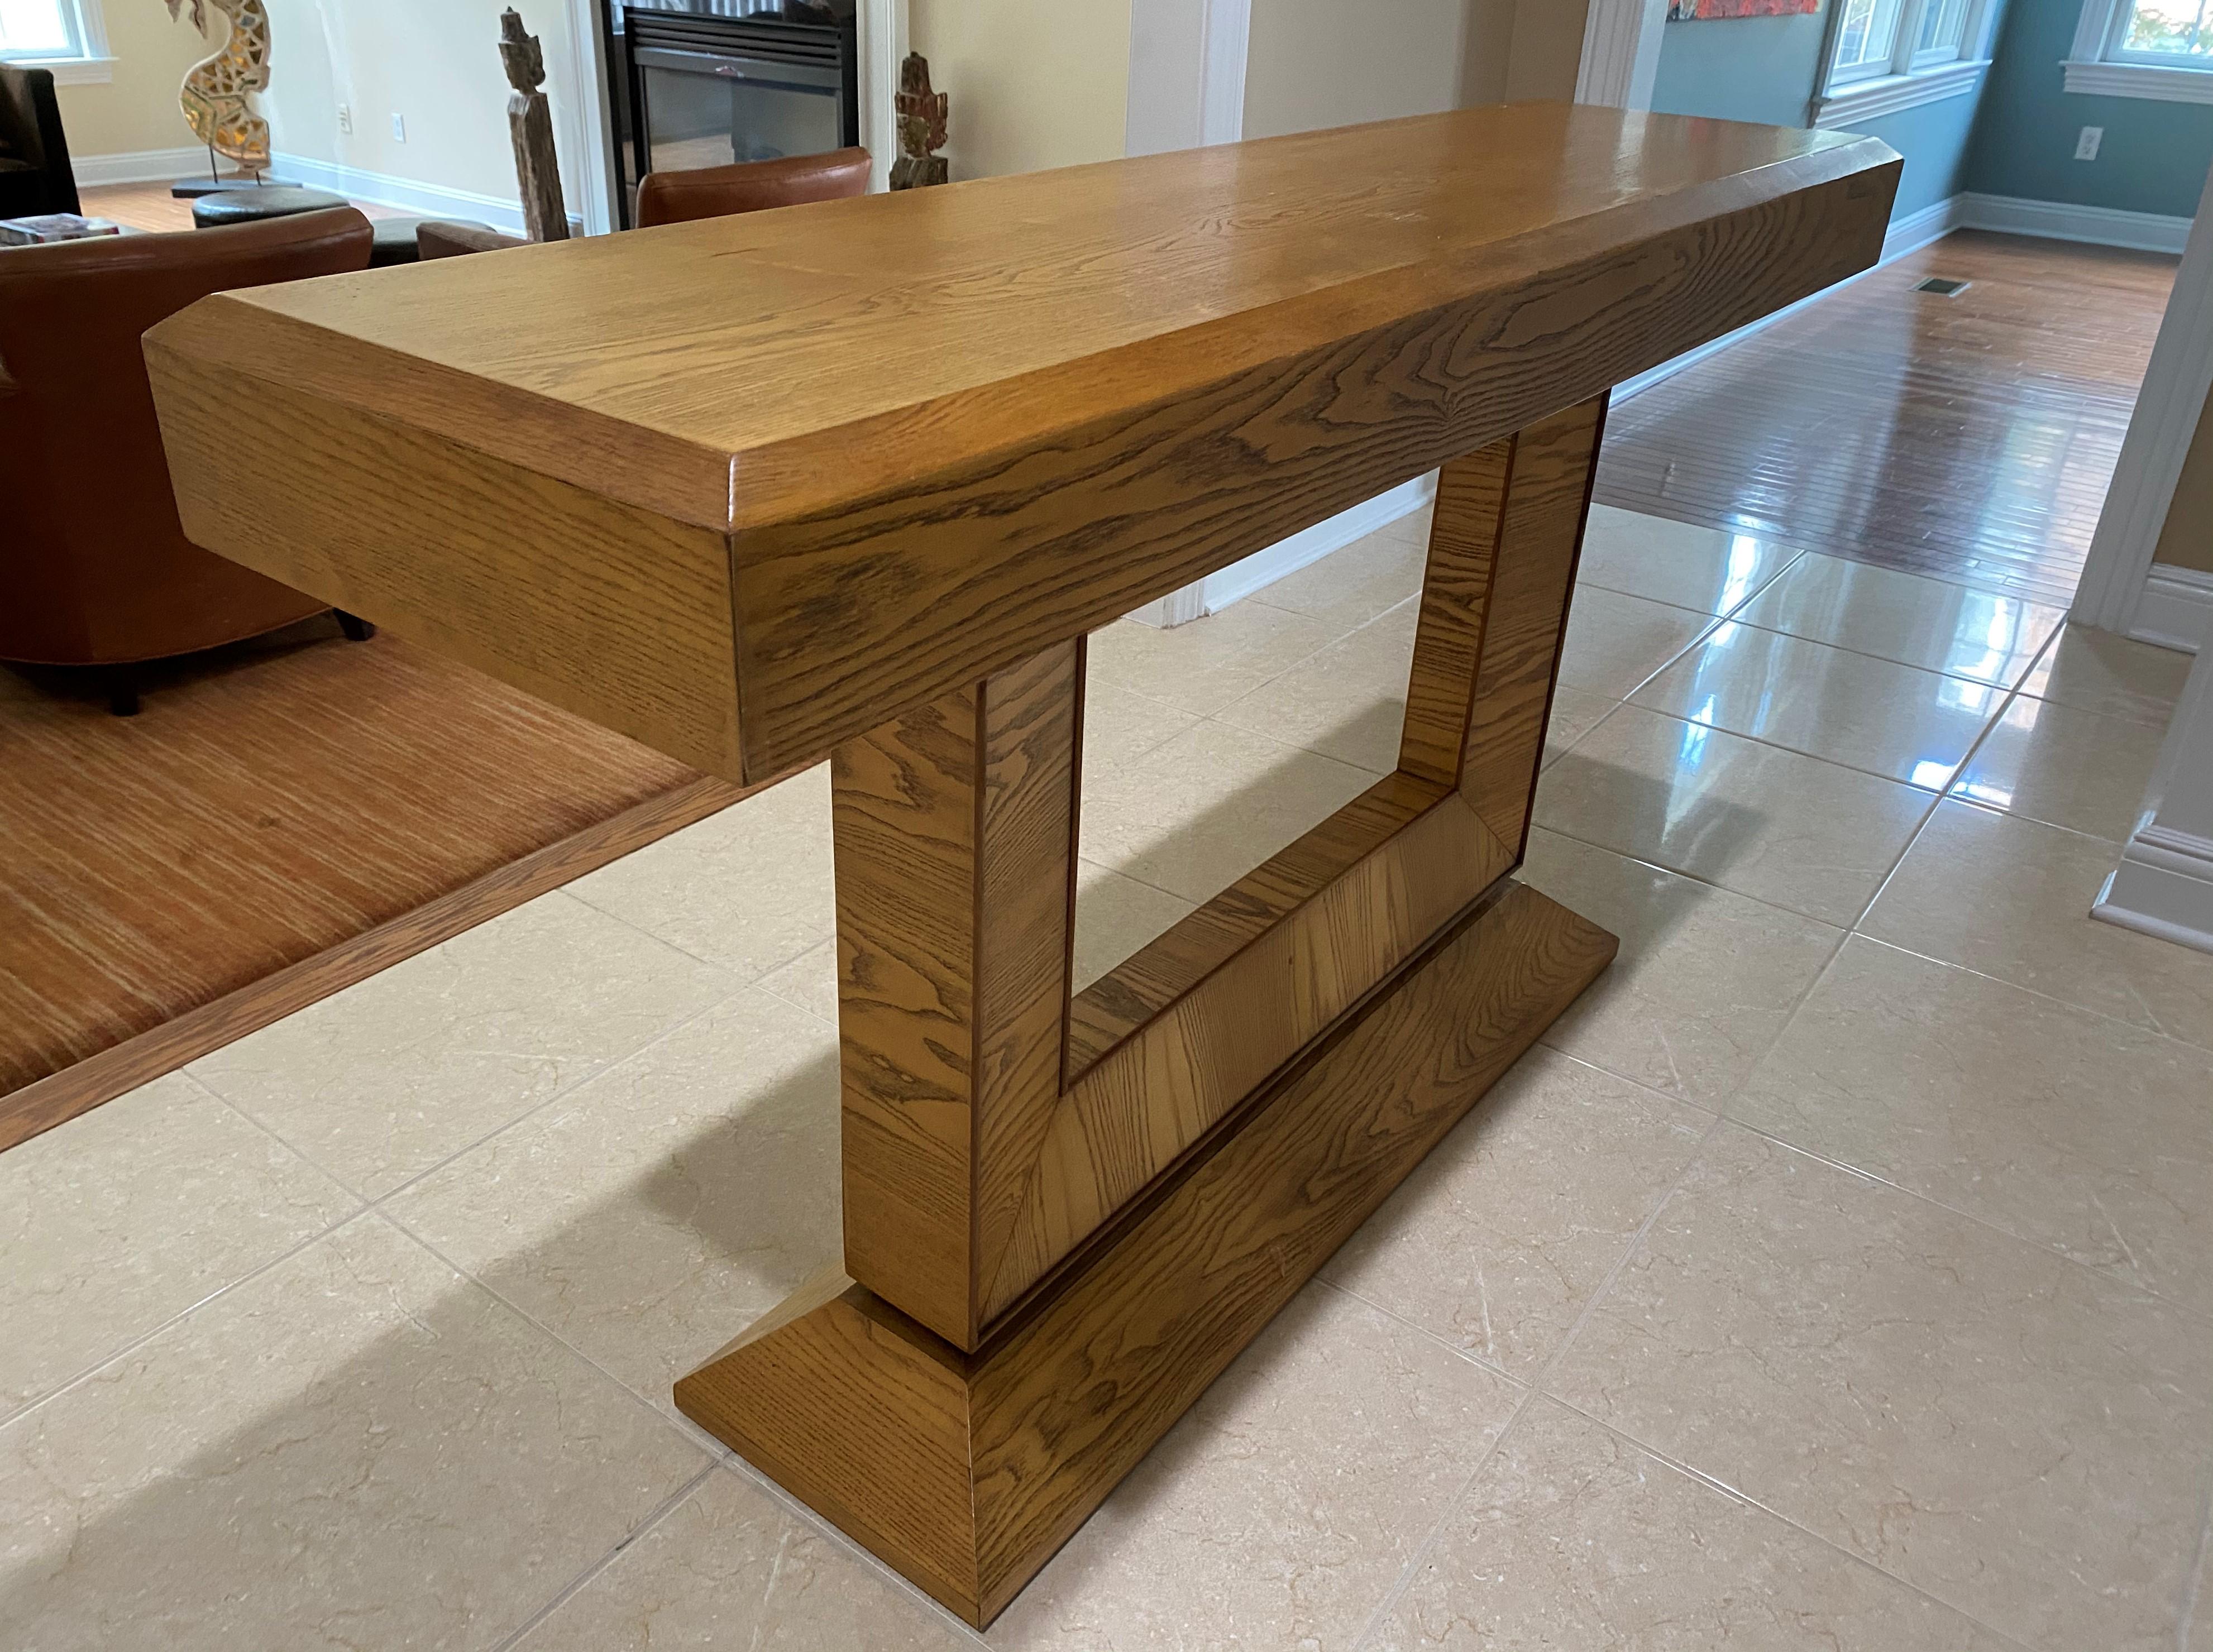 Midcentury style solid wood with a beautiful oak veneer console table with a drawer. See inside of drawer picture for the maker's mark. Clean lines with a timeless style. Interesting base.